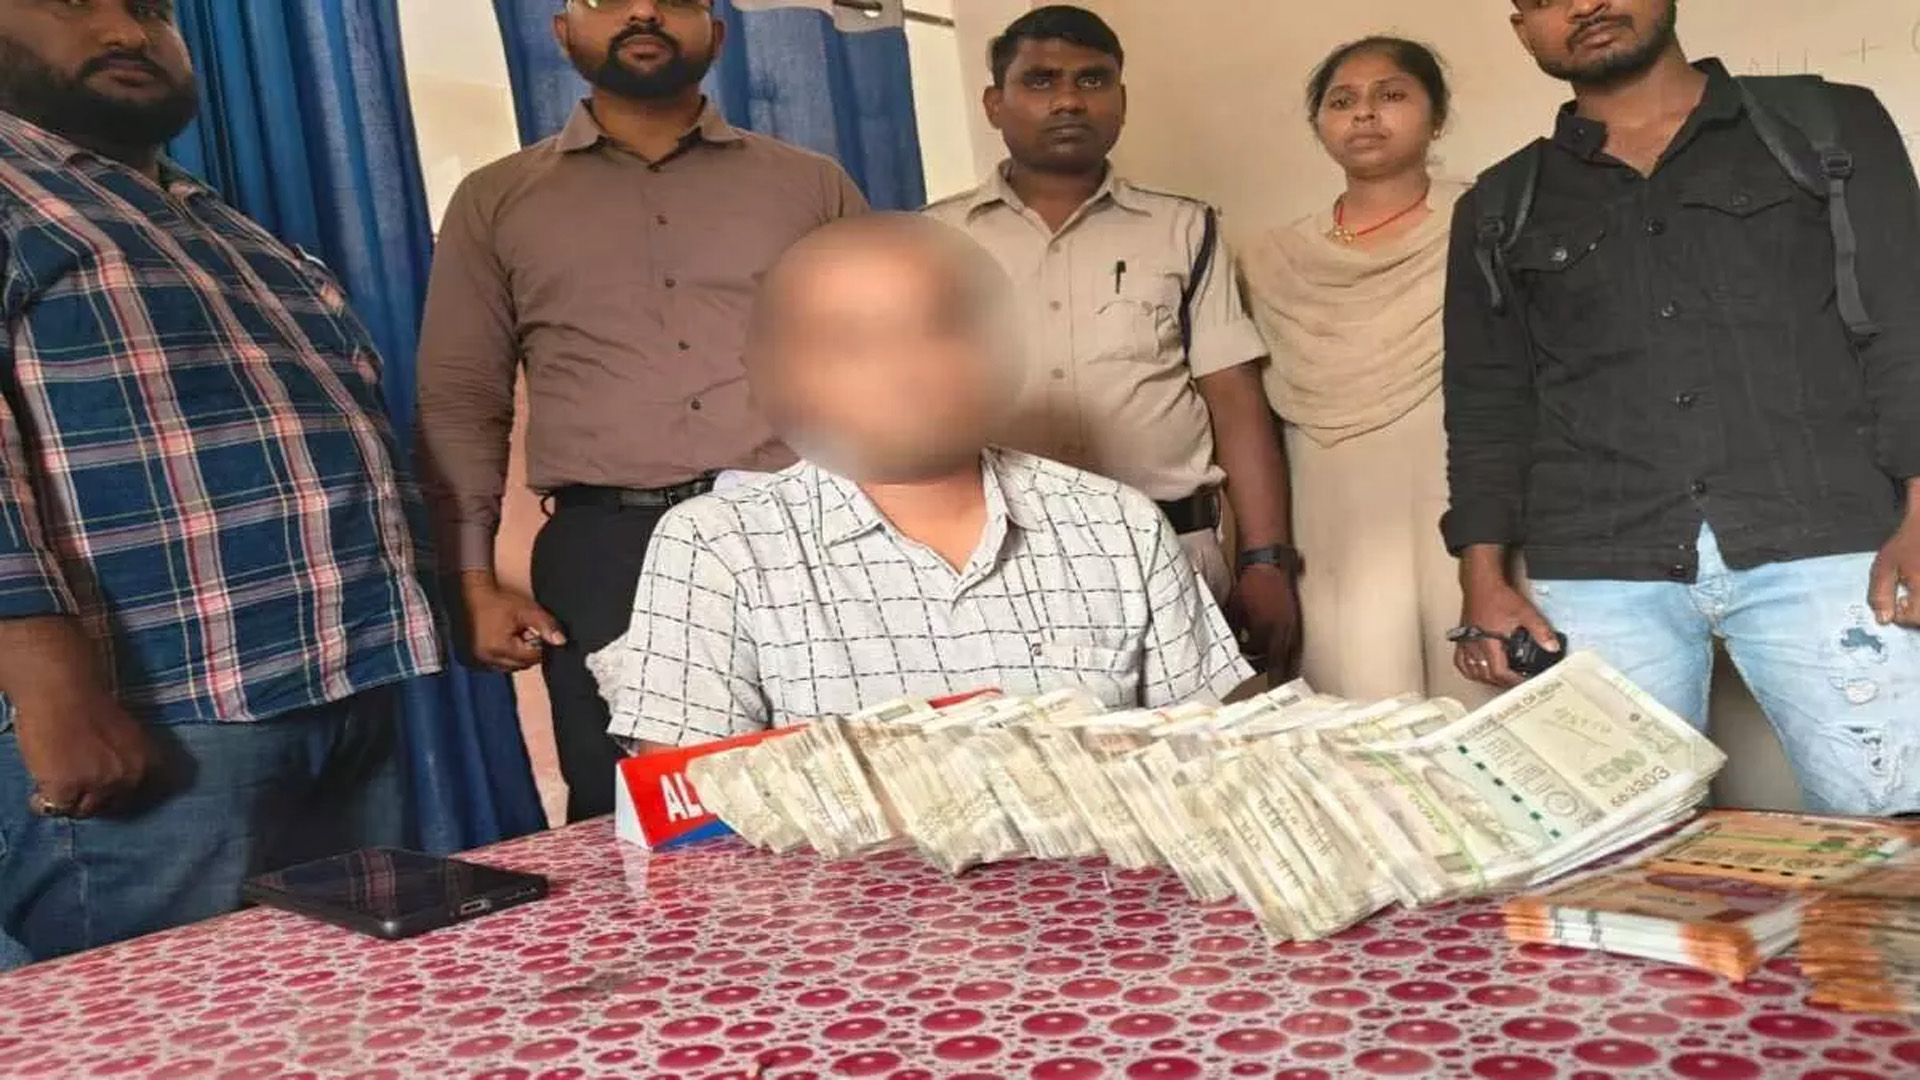 7 lakh cash found in car checking, driver did not have valid documents